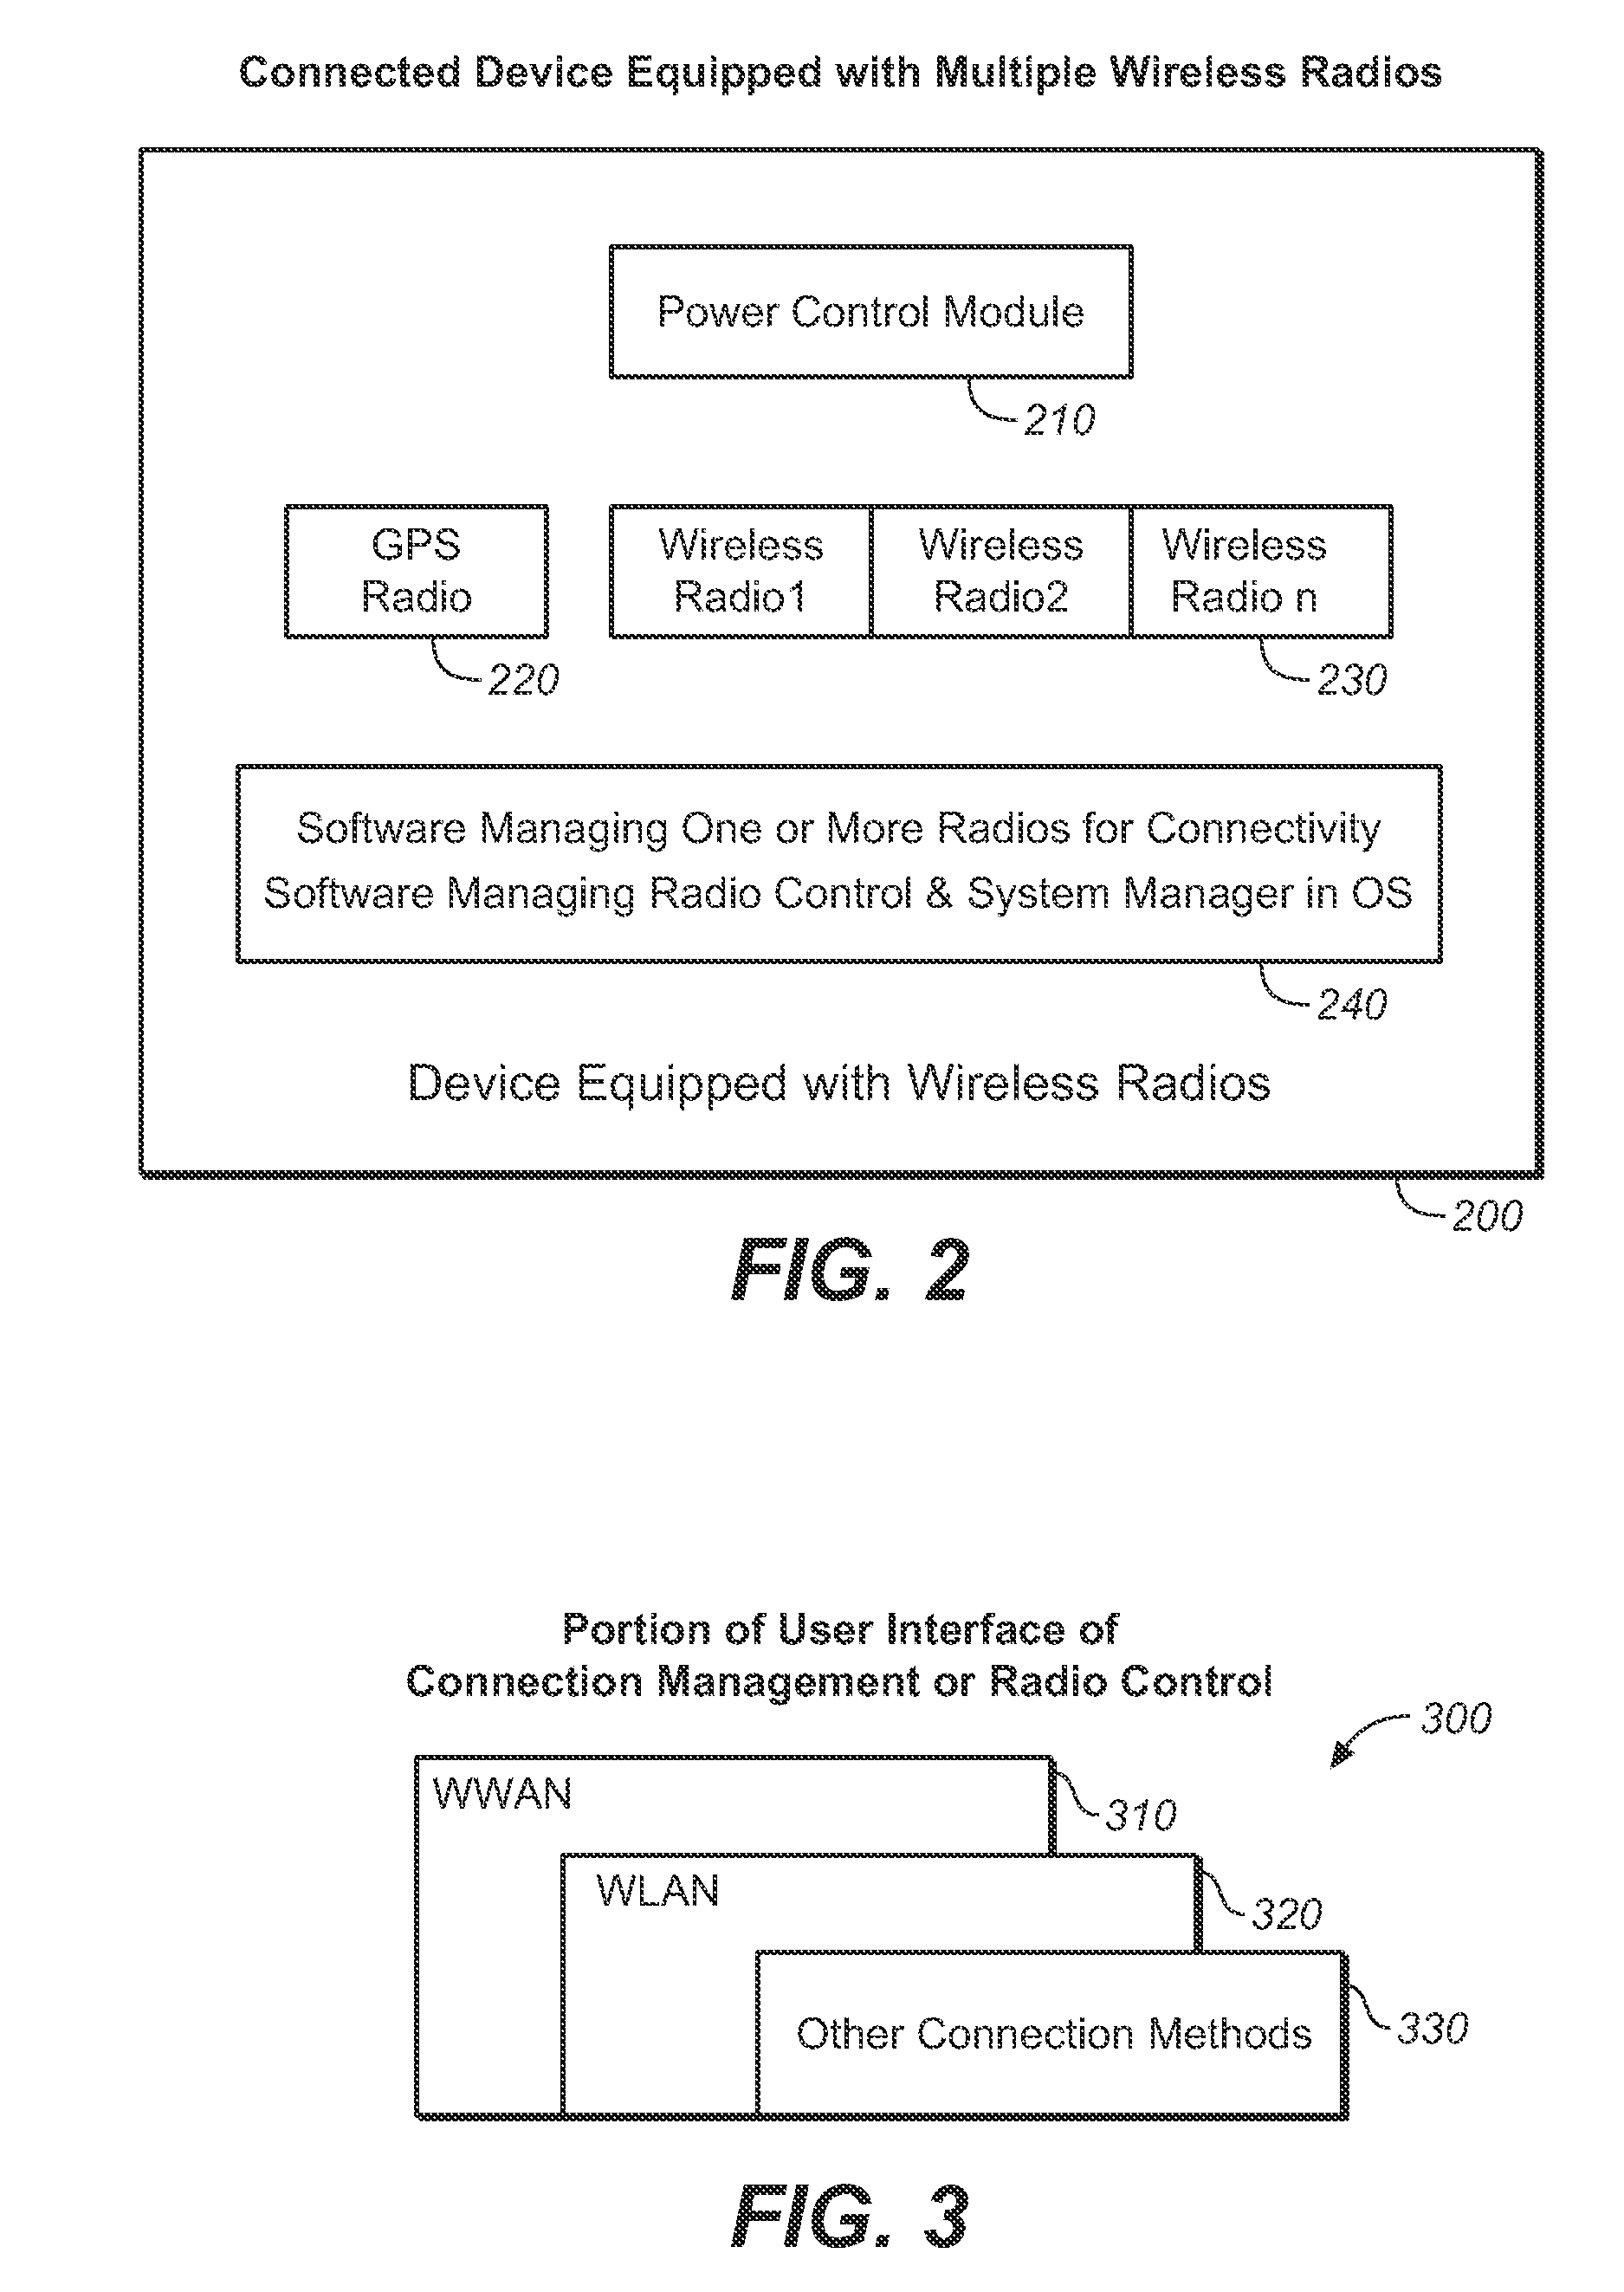 System for eco-friendly management of connected devices